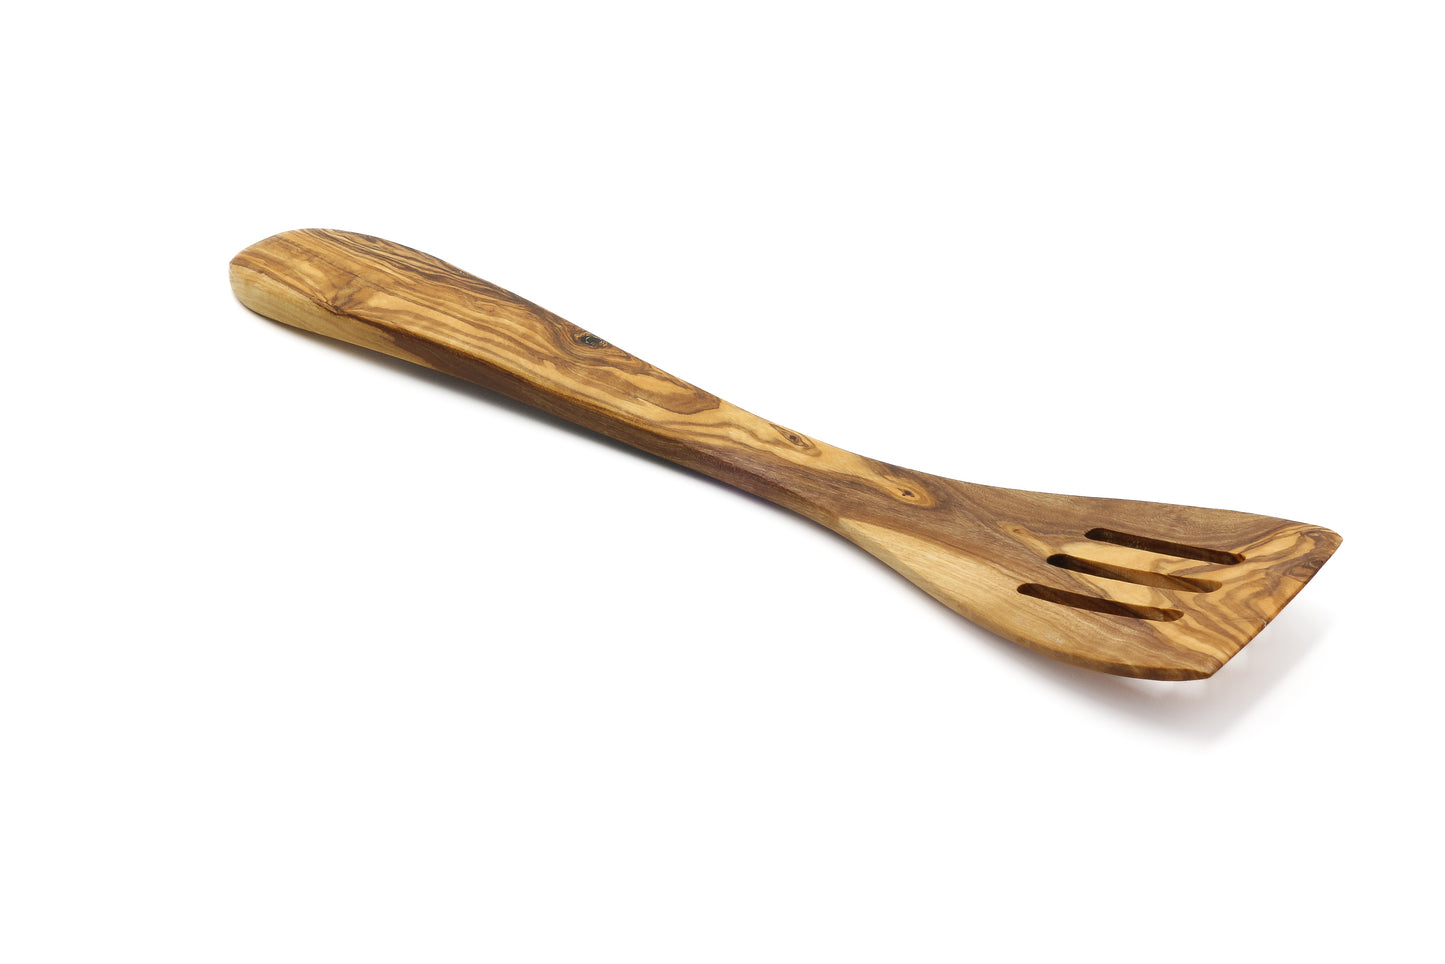 Olive wood slotted turner for cooking